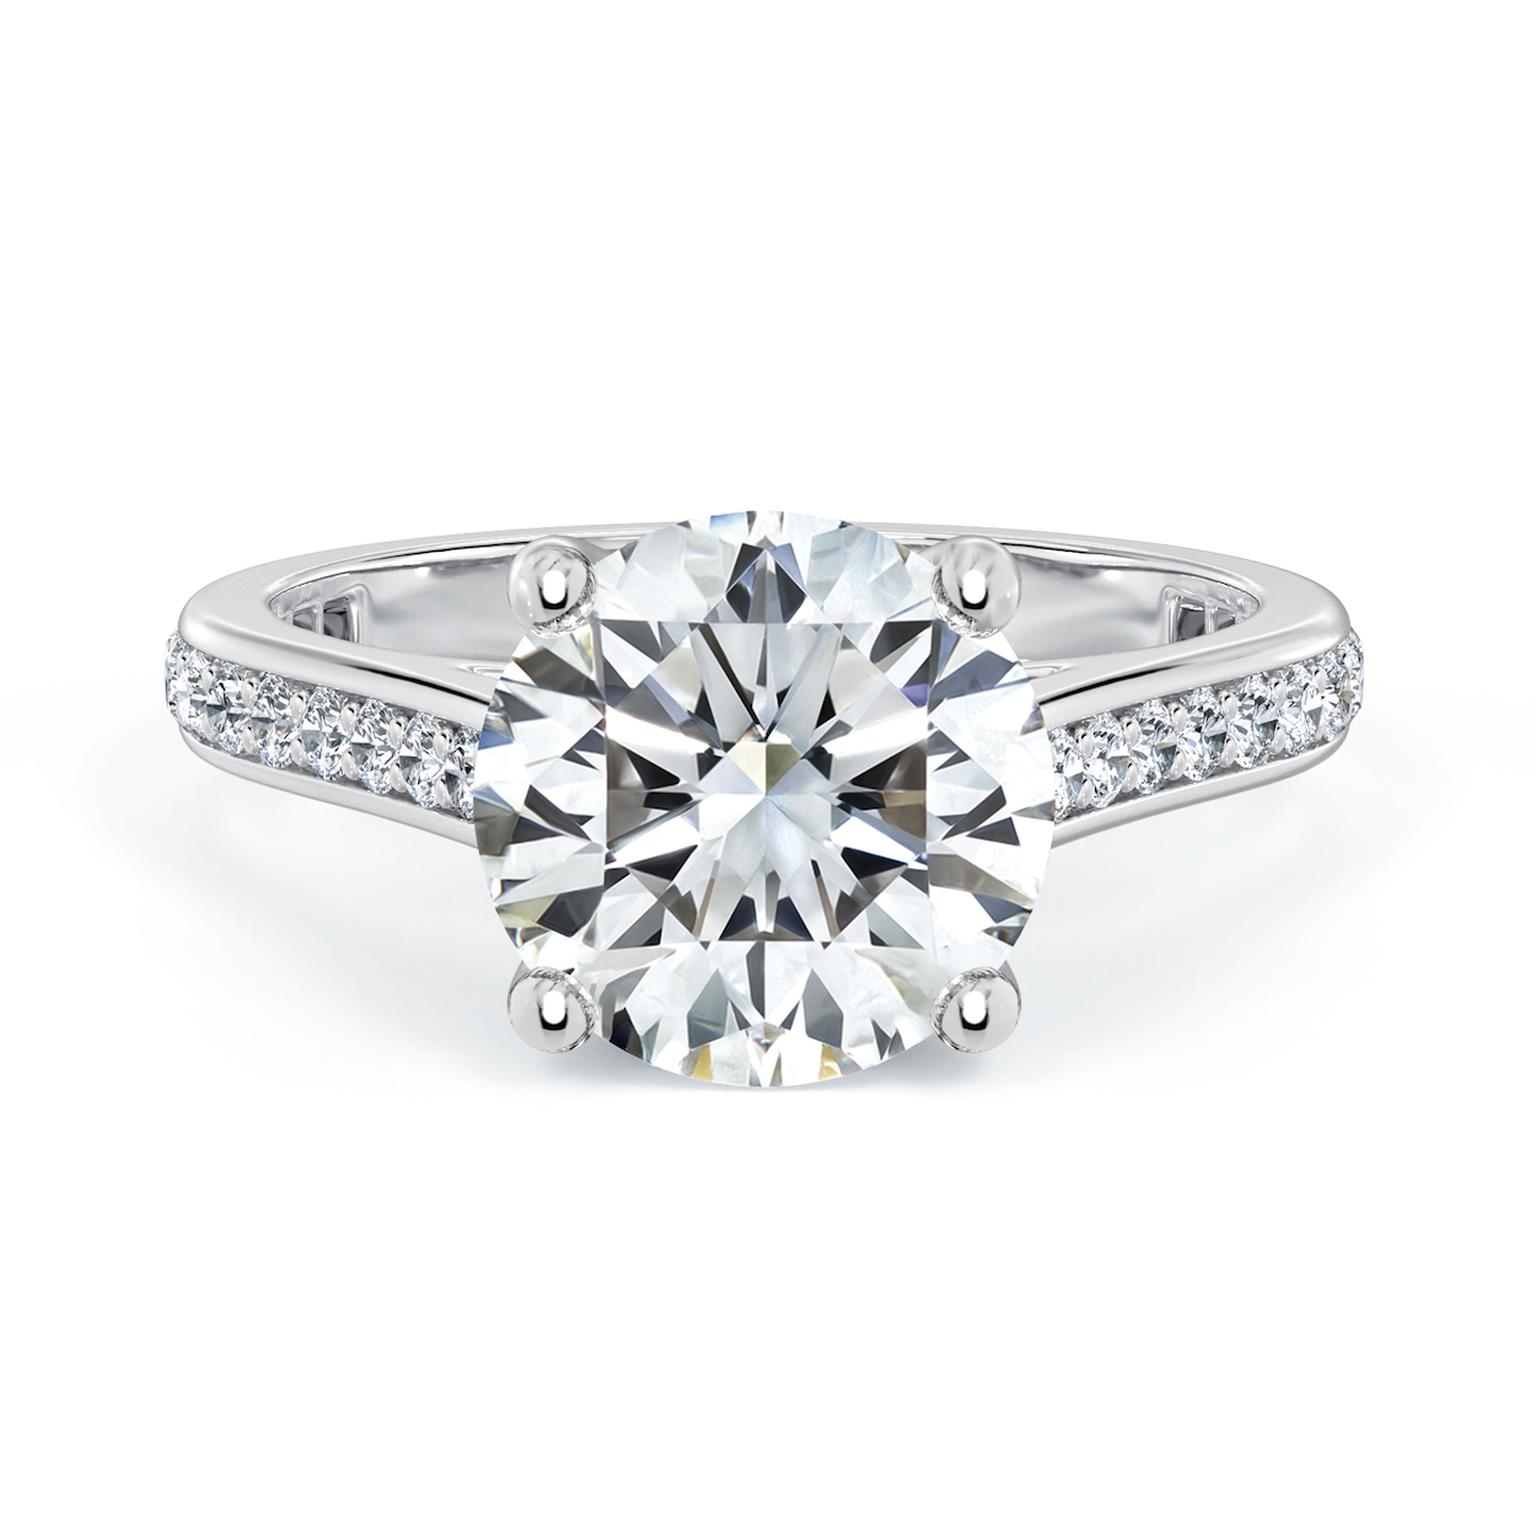 Prelude jacket ring solitaire by De Beers - Diamond ring only